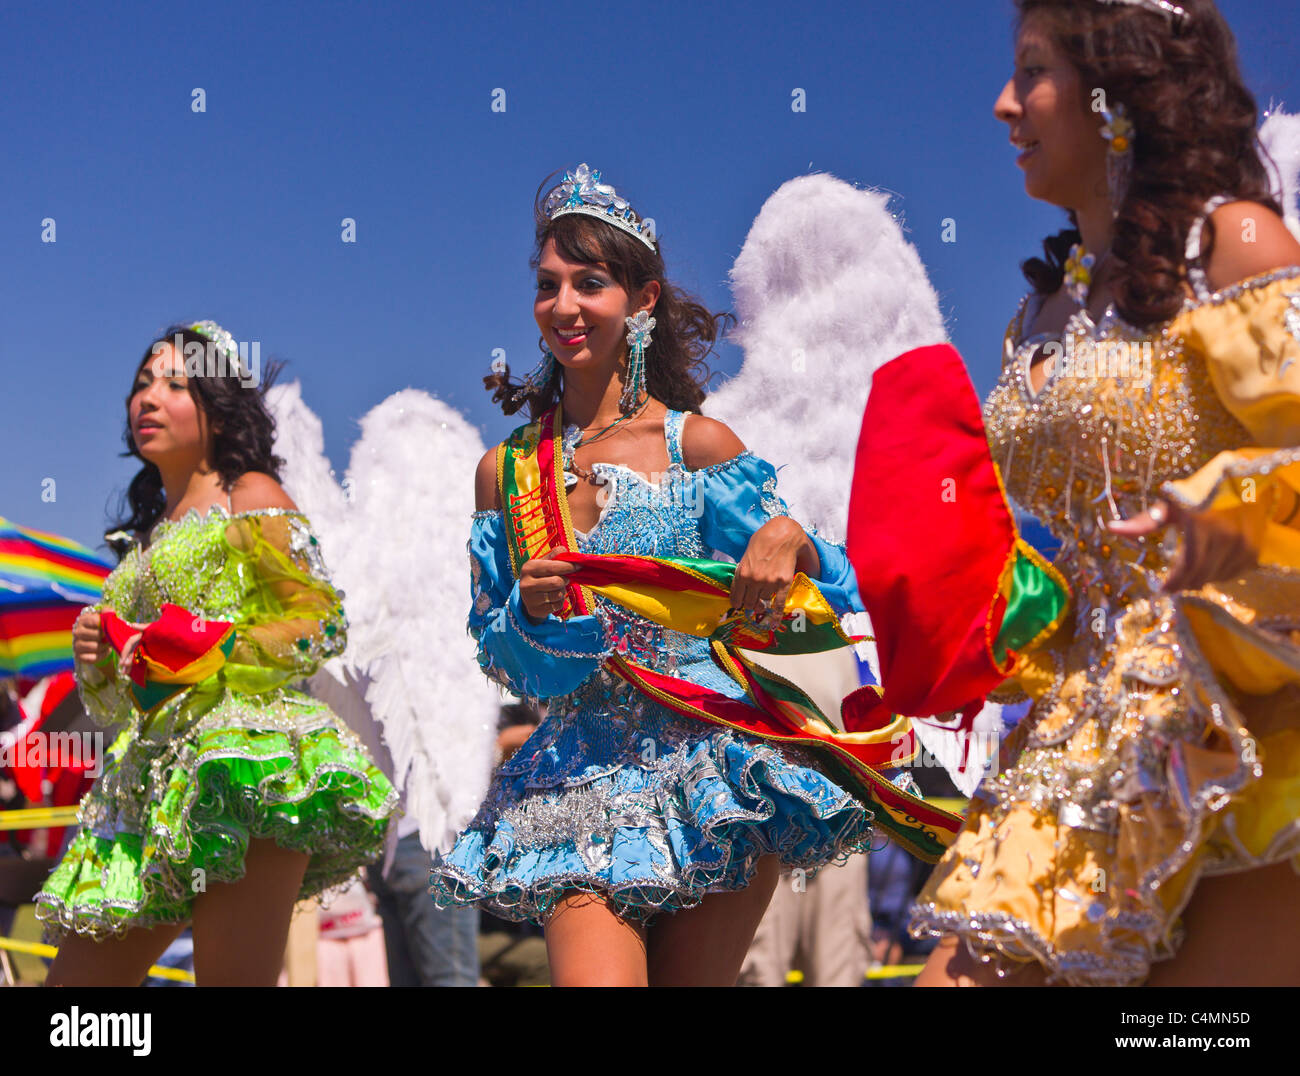 MANASSAS, VIRGINIA, USA - Women with angel wings during Bolivian folklife festival parade with dancers in costume. Stock Photo